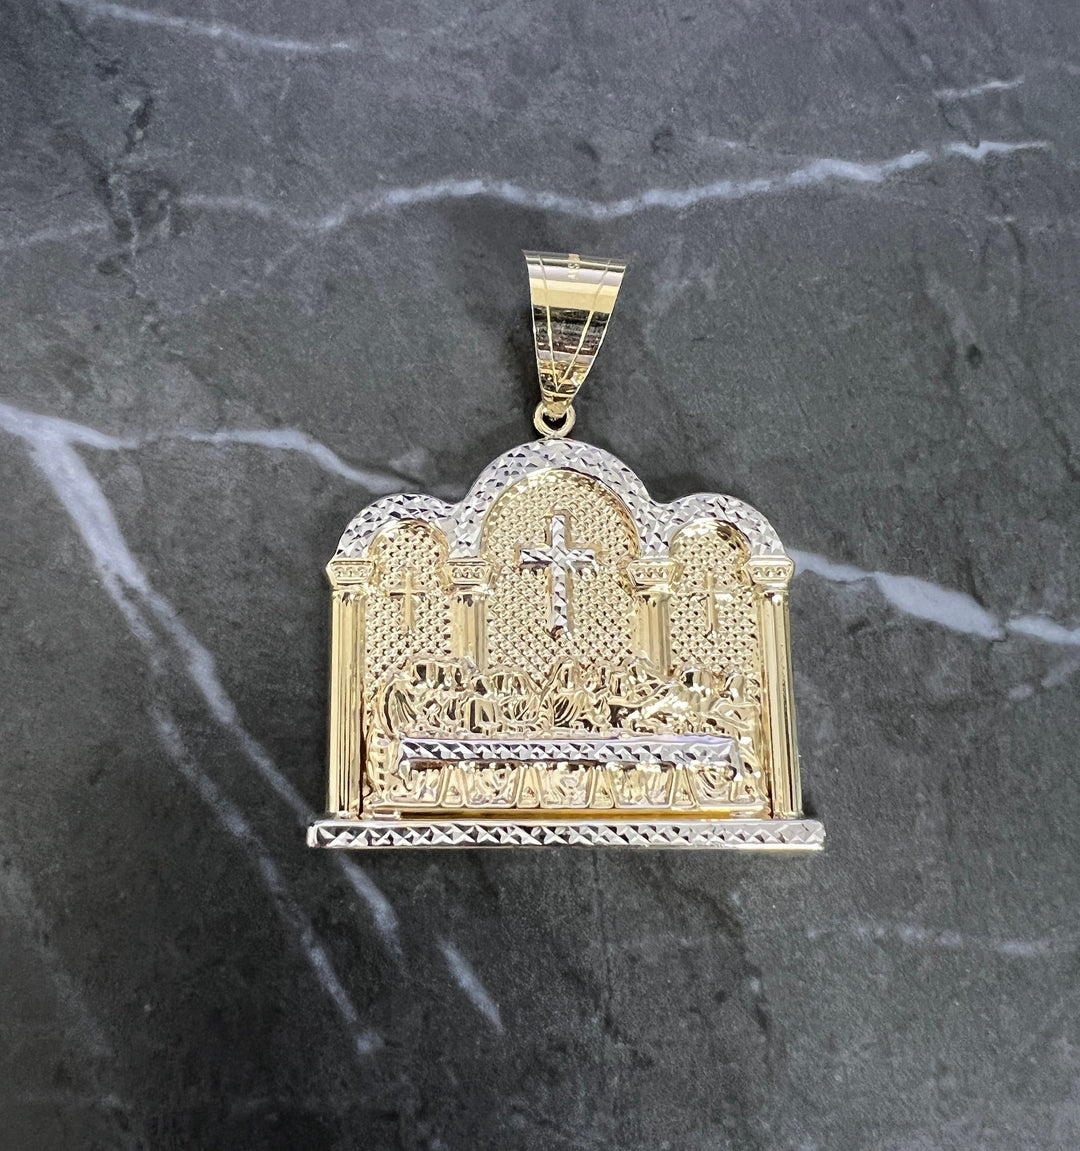 10K Yellow Gold .925 Sterling Silver Apostles Last Supper Charm/Pendant, Authentic, Textured Jesus Cross with Disciples Faith, Diamond Cut